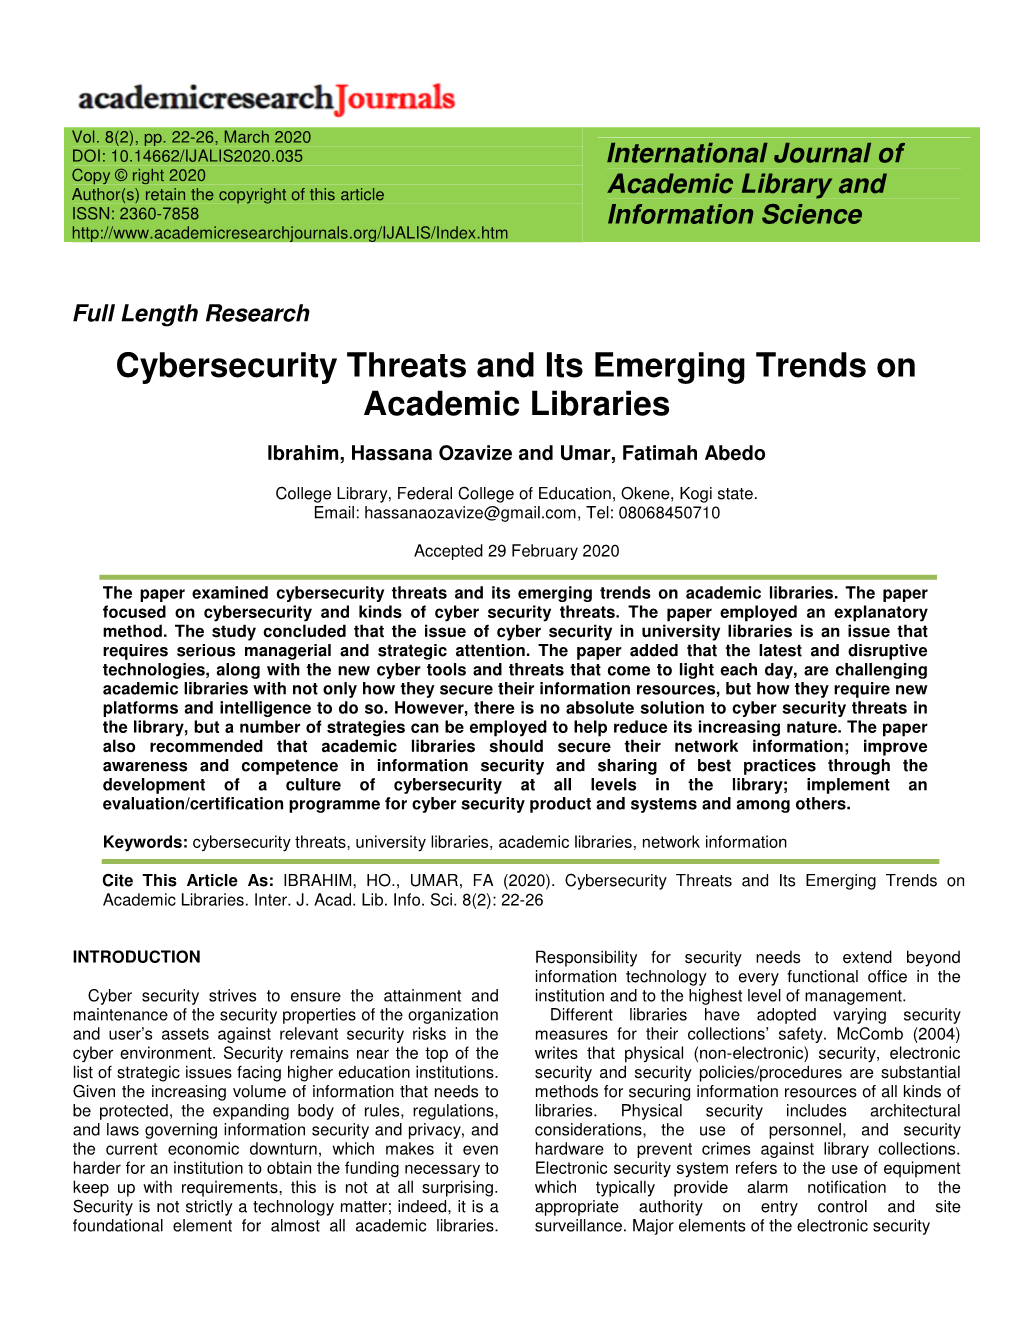 Cybersecurity Threats and Its Emerging Trends on Academic Libraries